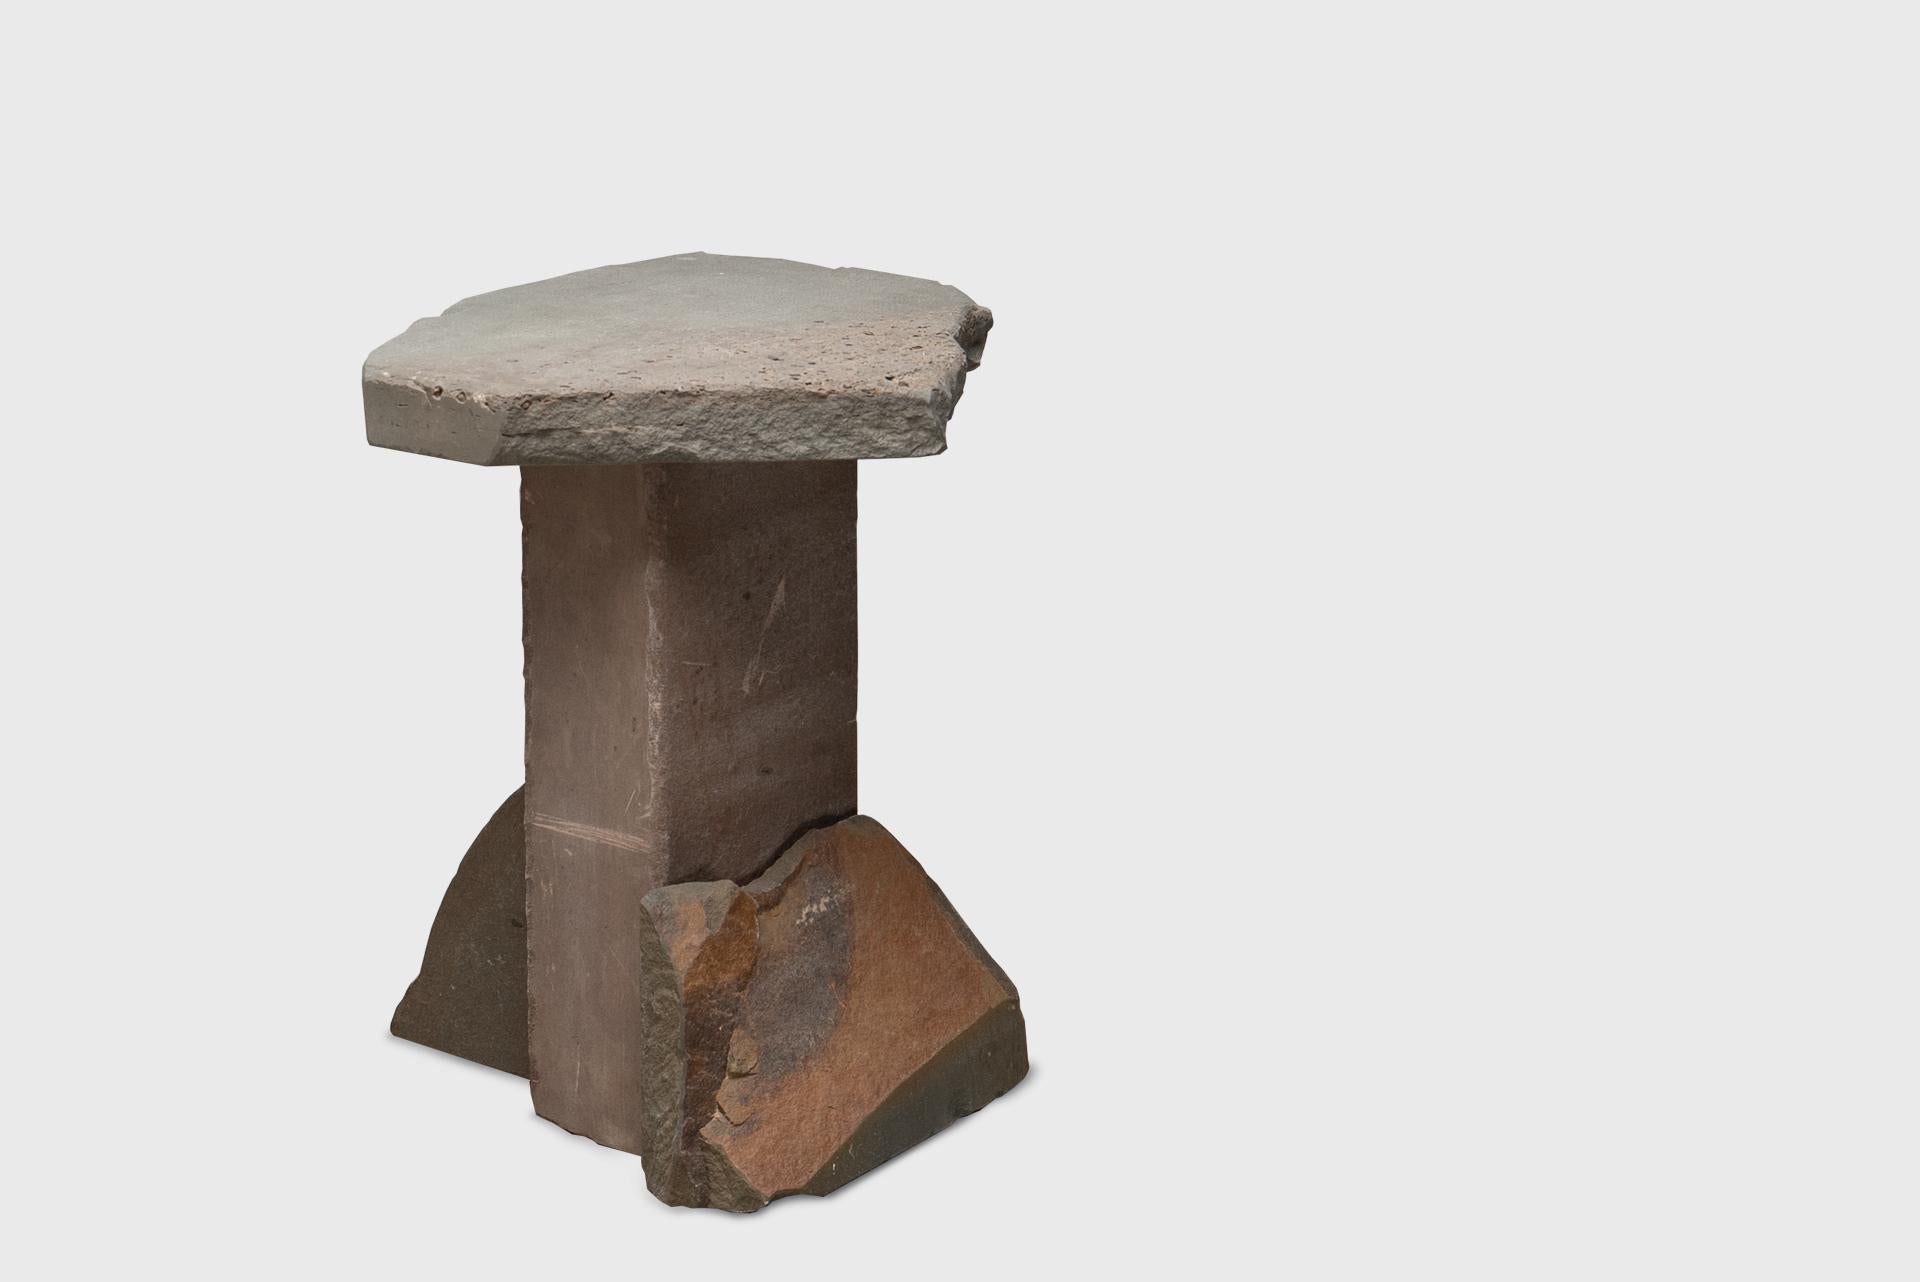 Contemporary Side Table 1, Graywacke Offcut Gray Stone, Carsten in Der Elst For Sale 1